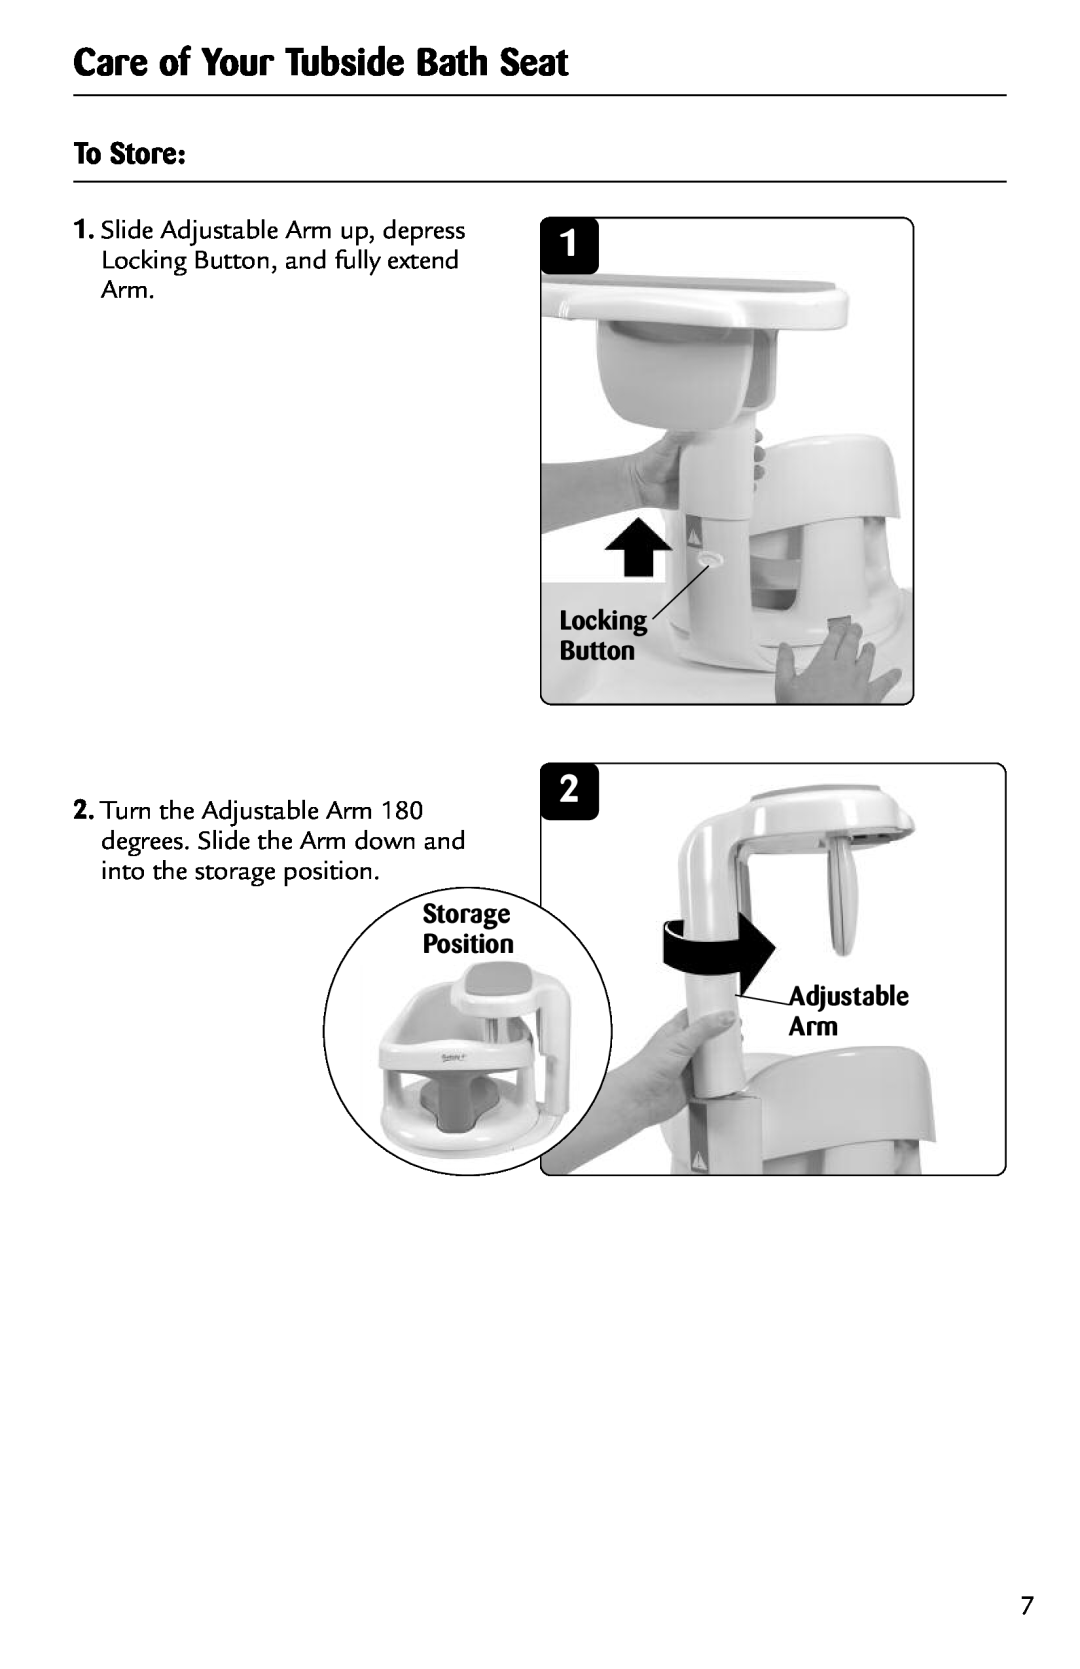 Safety 1st 44301A manual Care of Your Tubside Bath Seat, To Store, Slide Adjustable Arm up, depress, Locking Button 